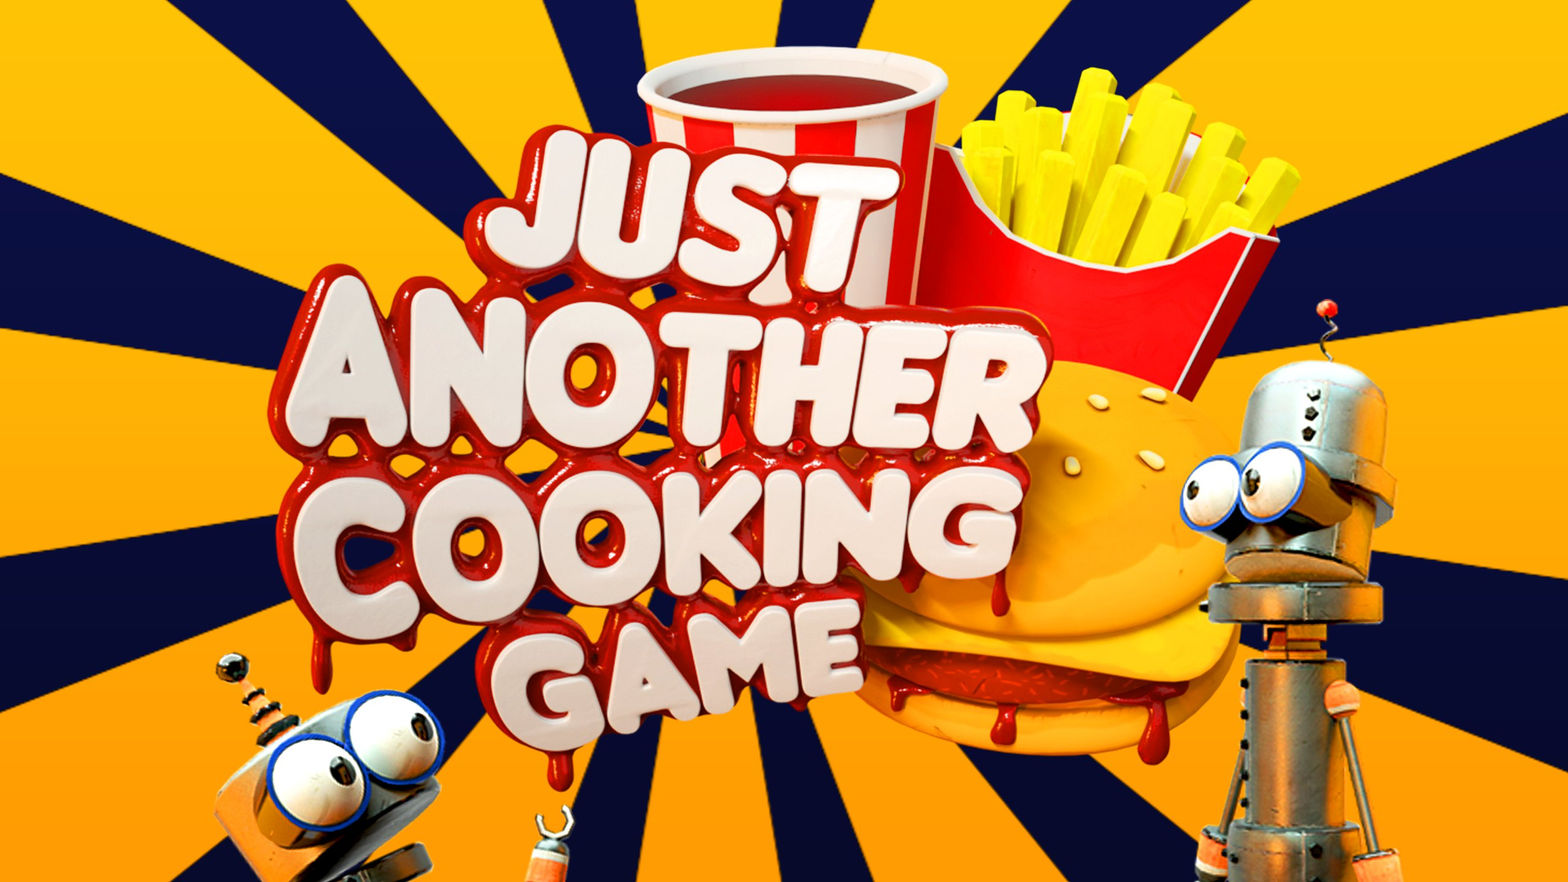 Just Another Cooking Game